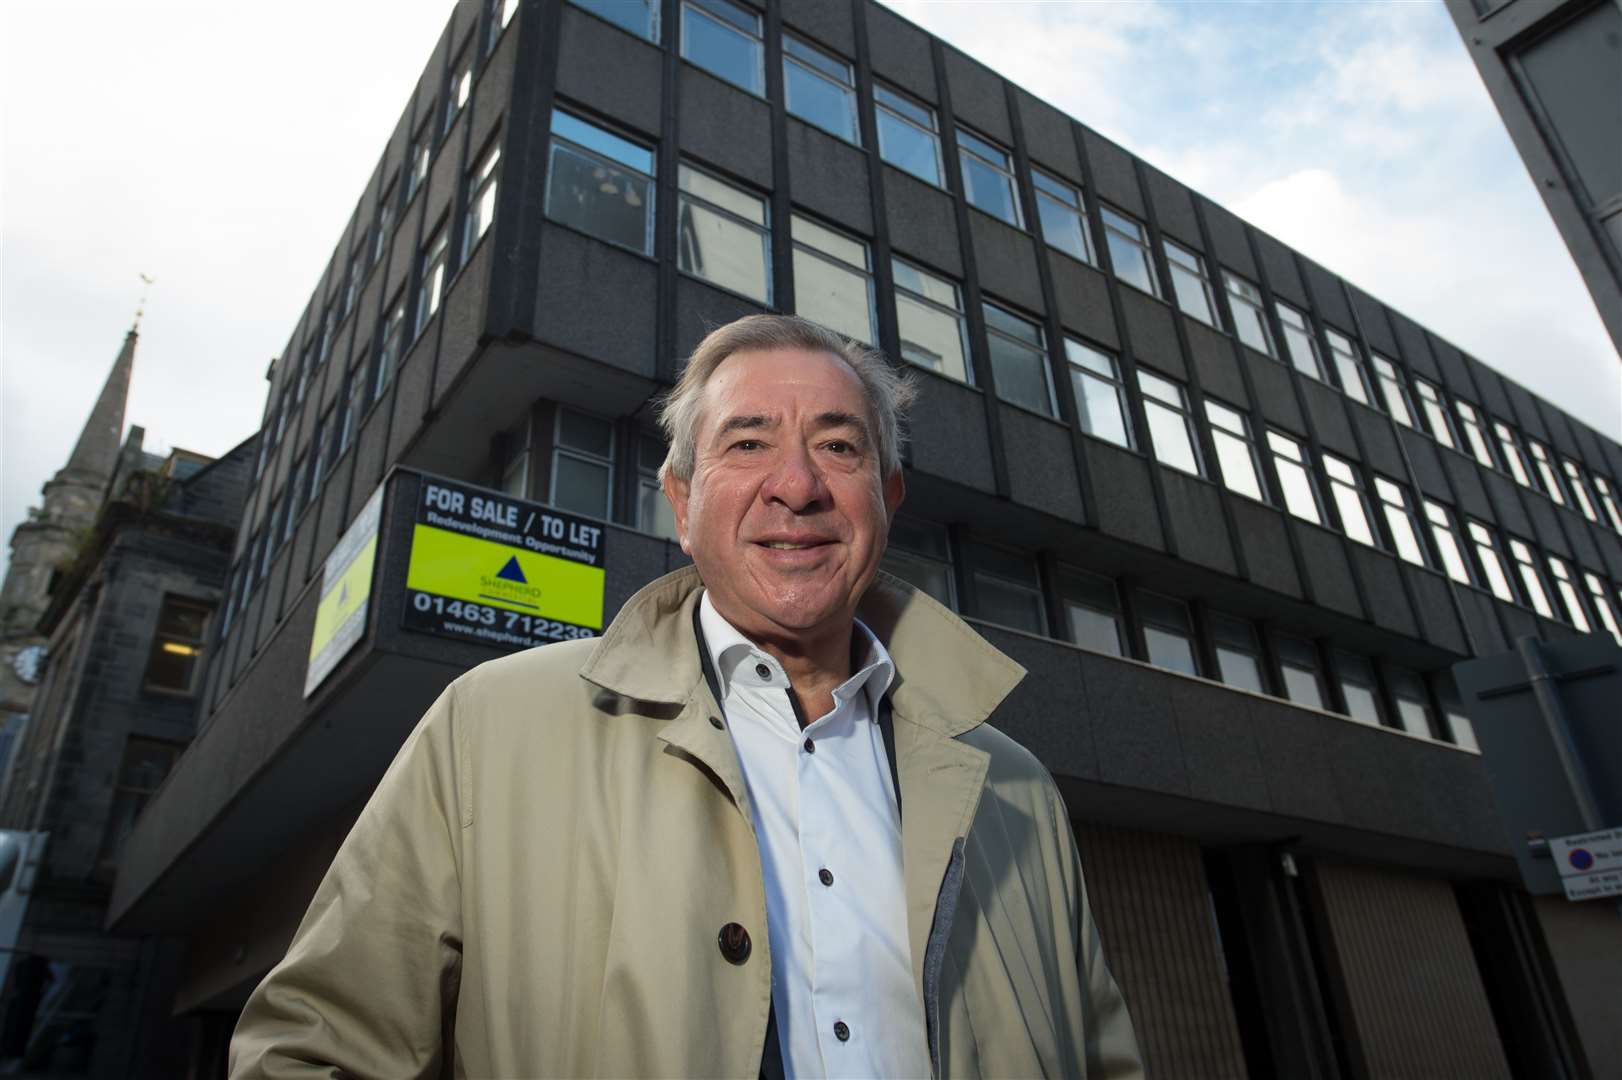 Tony Story, owner of the Kingsmills Hotel, at the old service point in Church Street which could be converted into a hotel. Picture: Callum Mackay